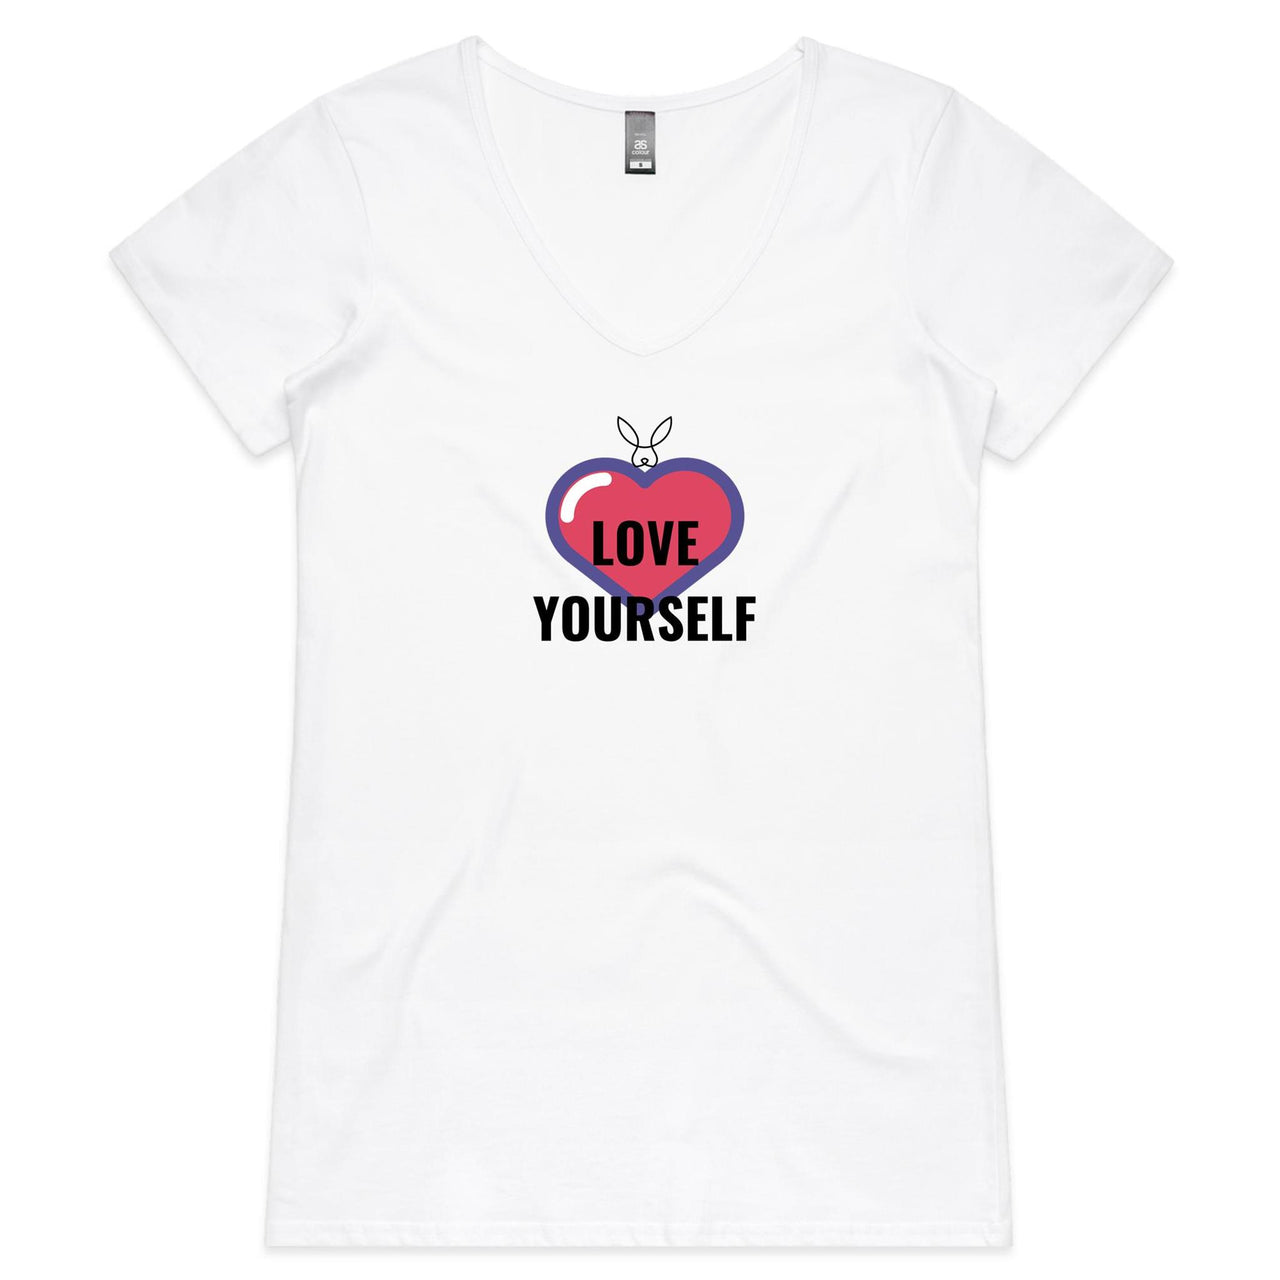 Love Yourself V Neck Tee by CBF Clothing. Mens womens unisex White